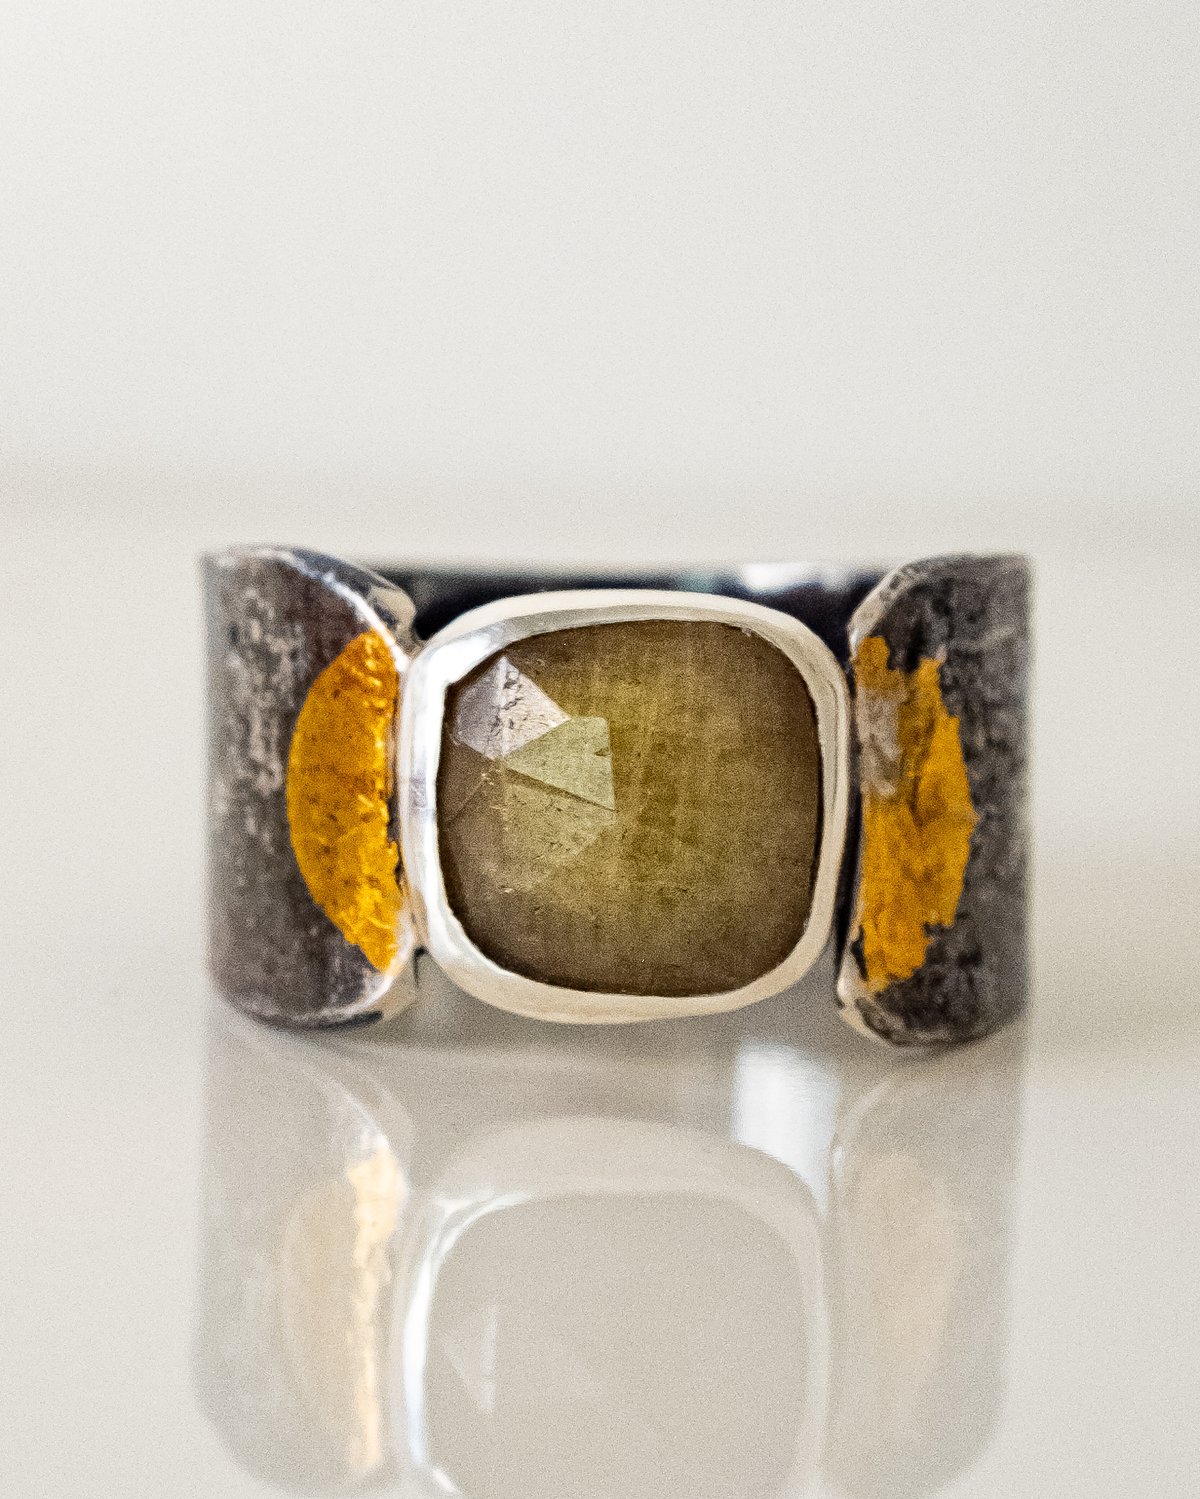 Image of Reticulated Silver, Sapphire and 24kt Keum Boo Ring